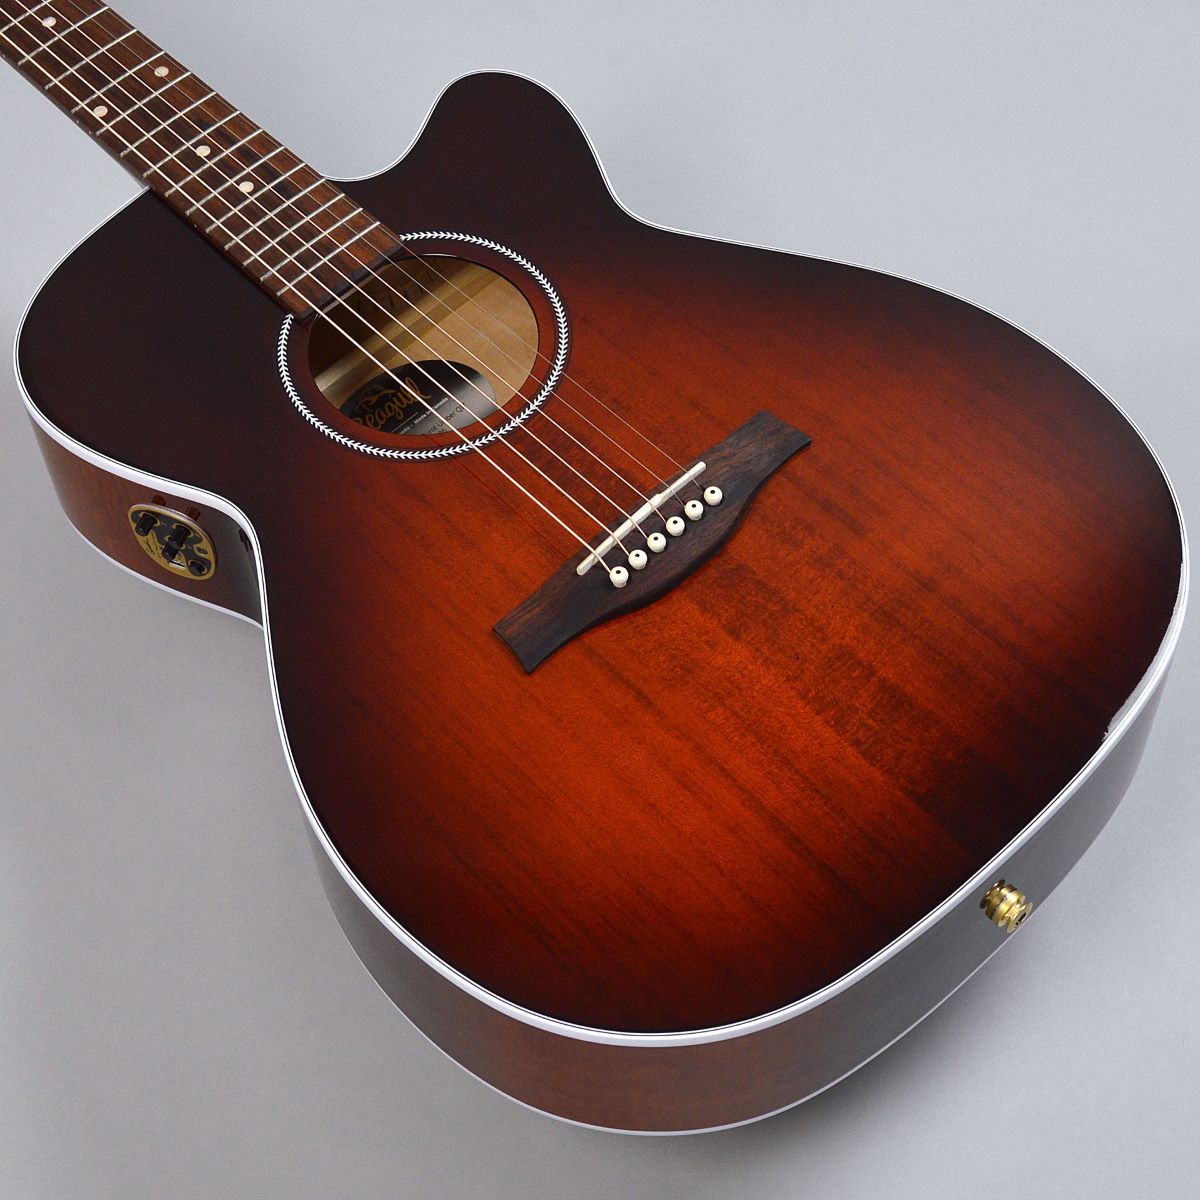 Seagull Performer CW Concert Hall Burnt Umber QIT エレアコギター